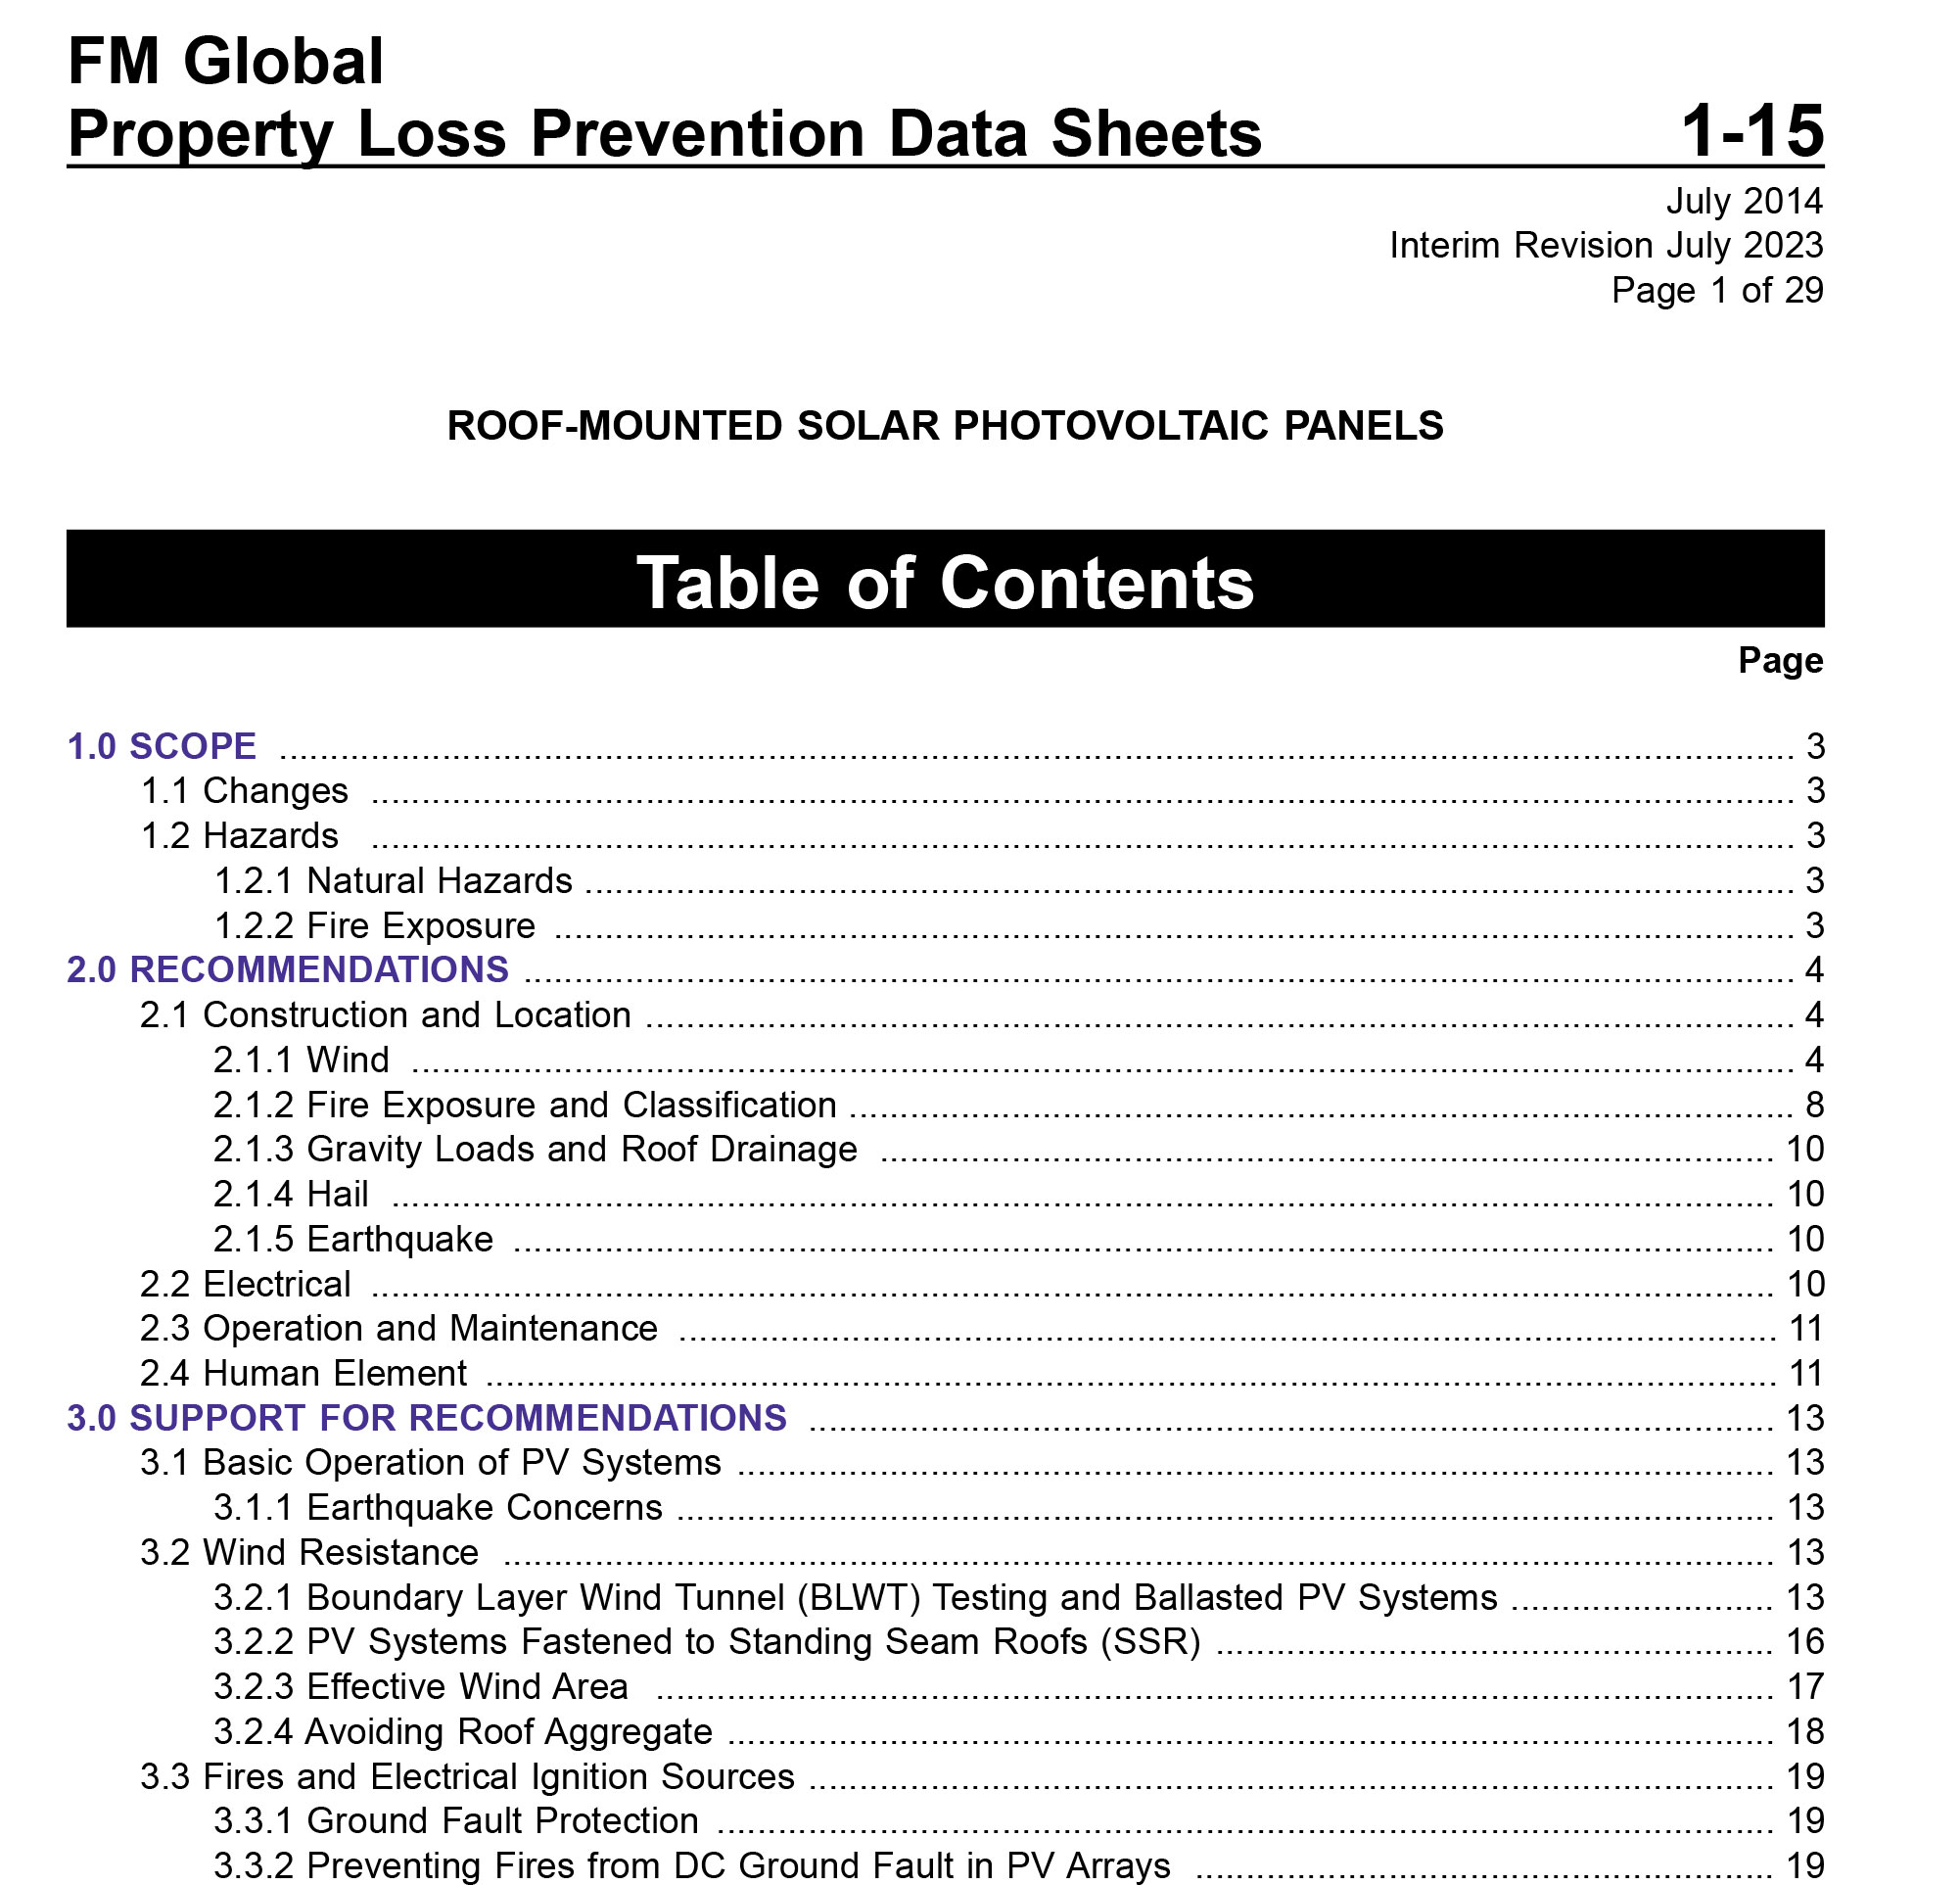 FM Global Property Loss Prevention Data Sheets – ROOF-MOUNTED SOLAR PHOTOVOLTAIC PANELS